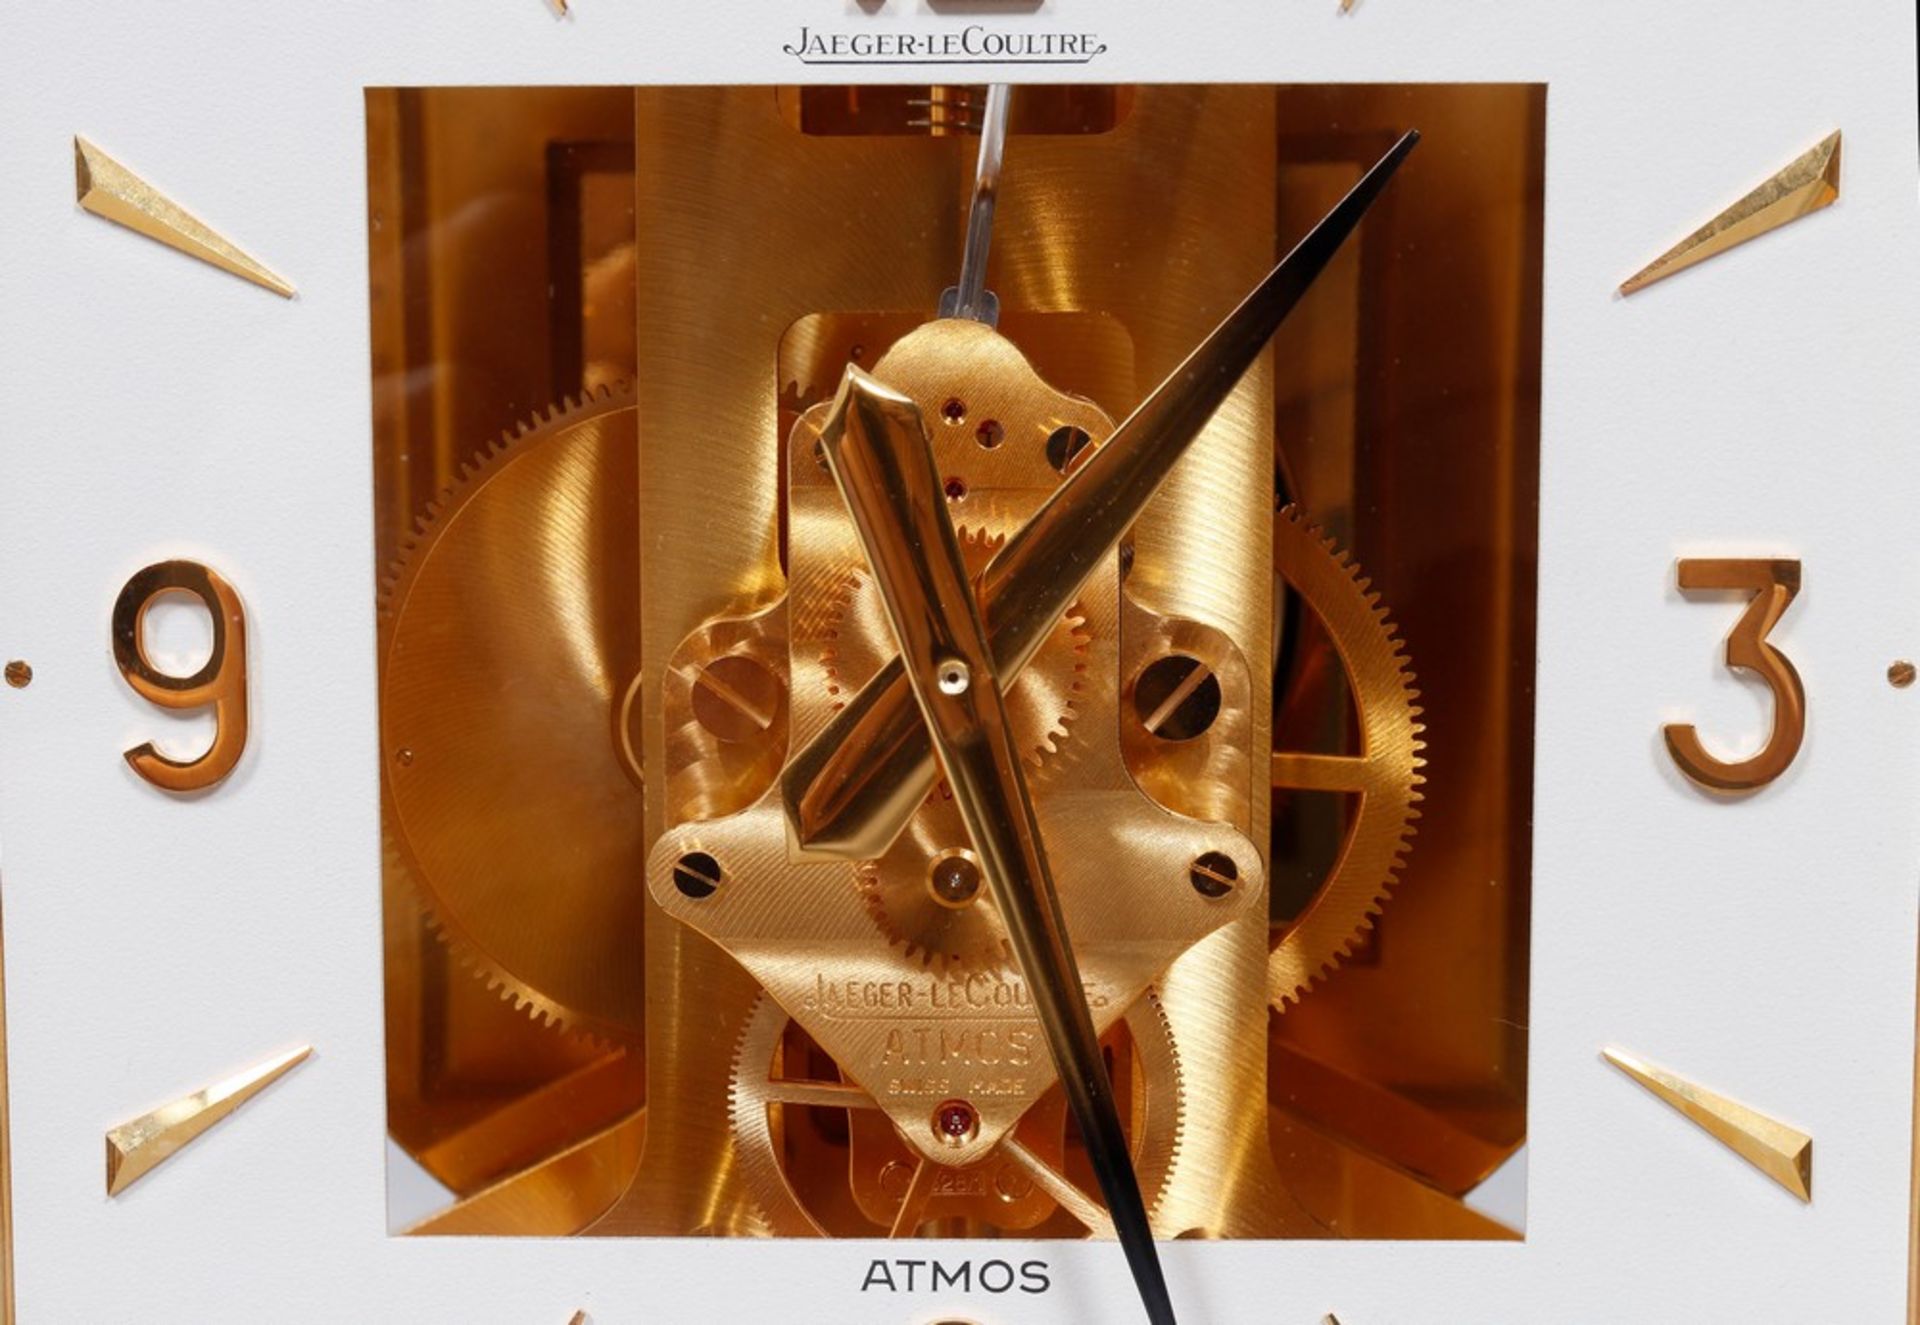 Table clock, Jaeger-LeCoultre, Switzerland, 1970s - Image 4 of 10